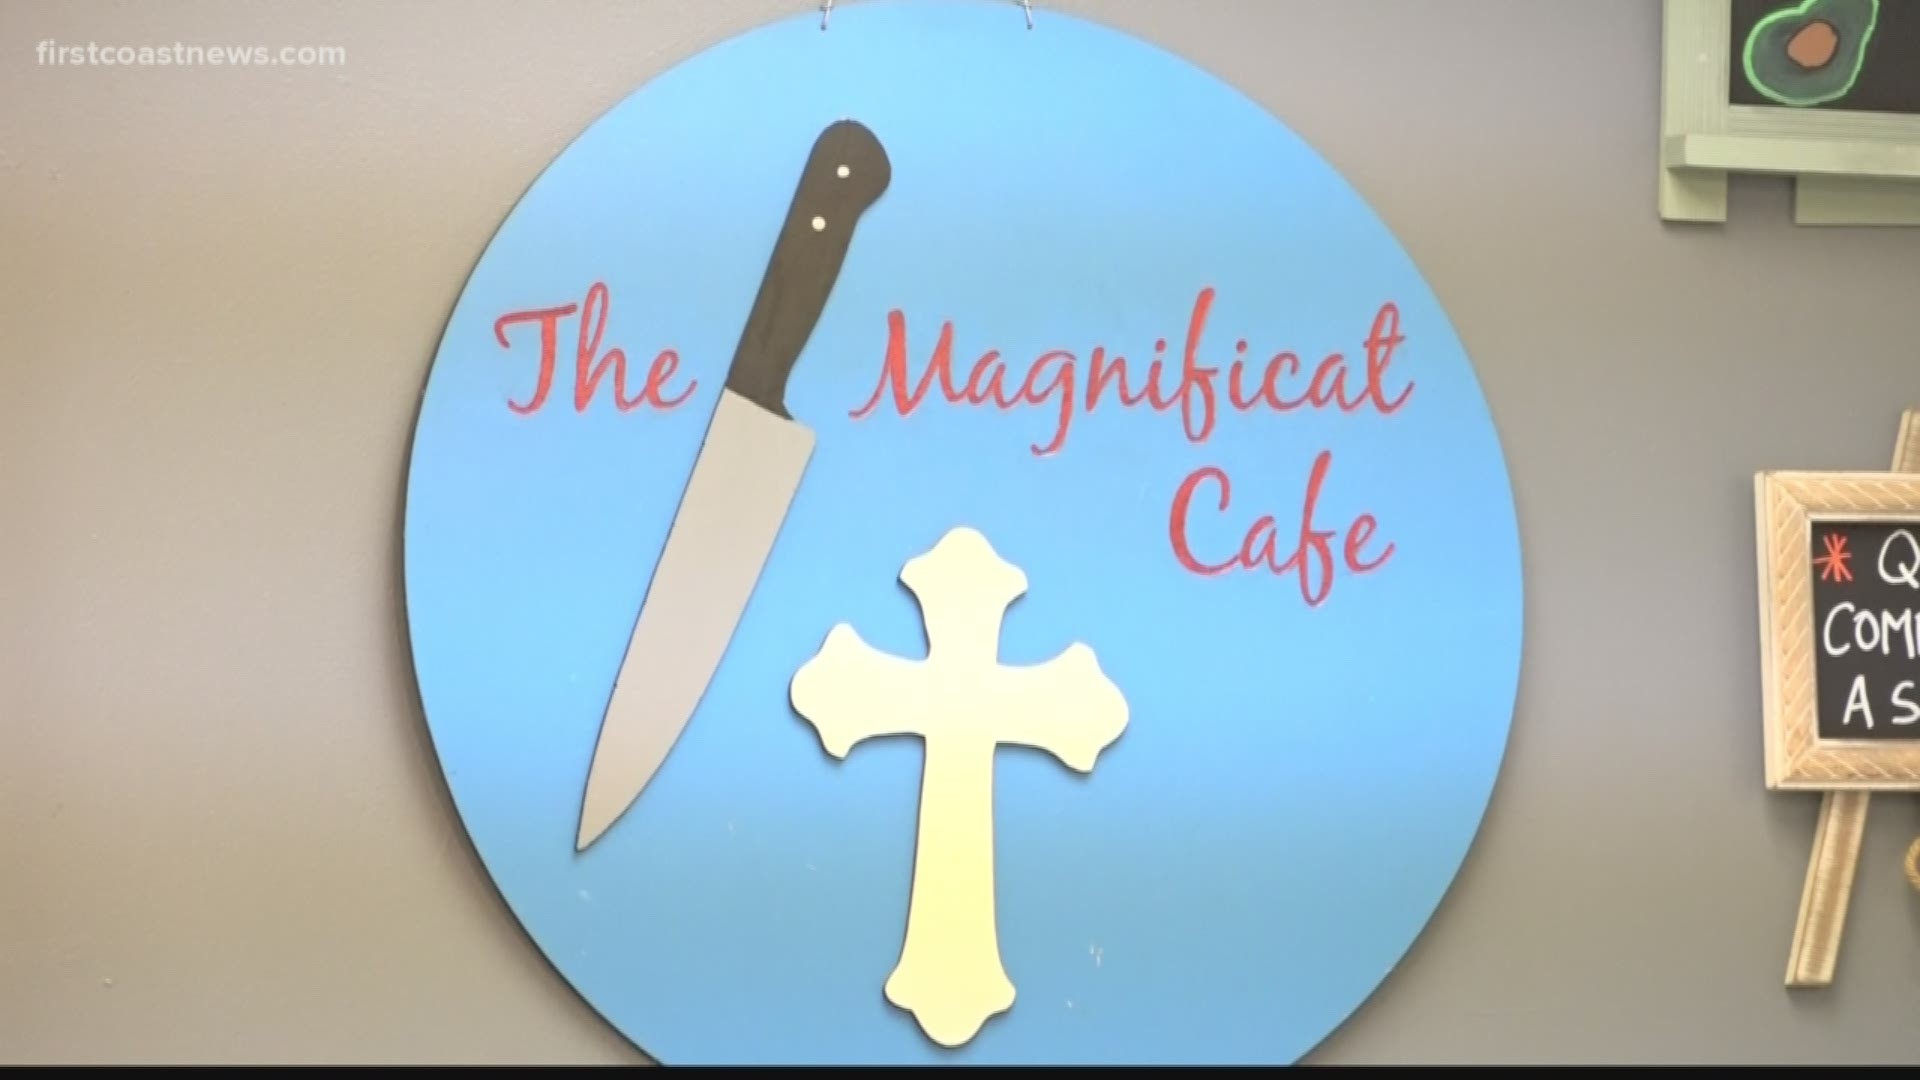 Owners of Magnificat Café in Downtown Jacksonville, and their 17-year-old son, are all battling cancer. Farah & Farah wants to match up to $10K in sales next week.